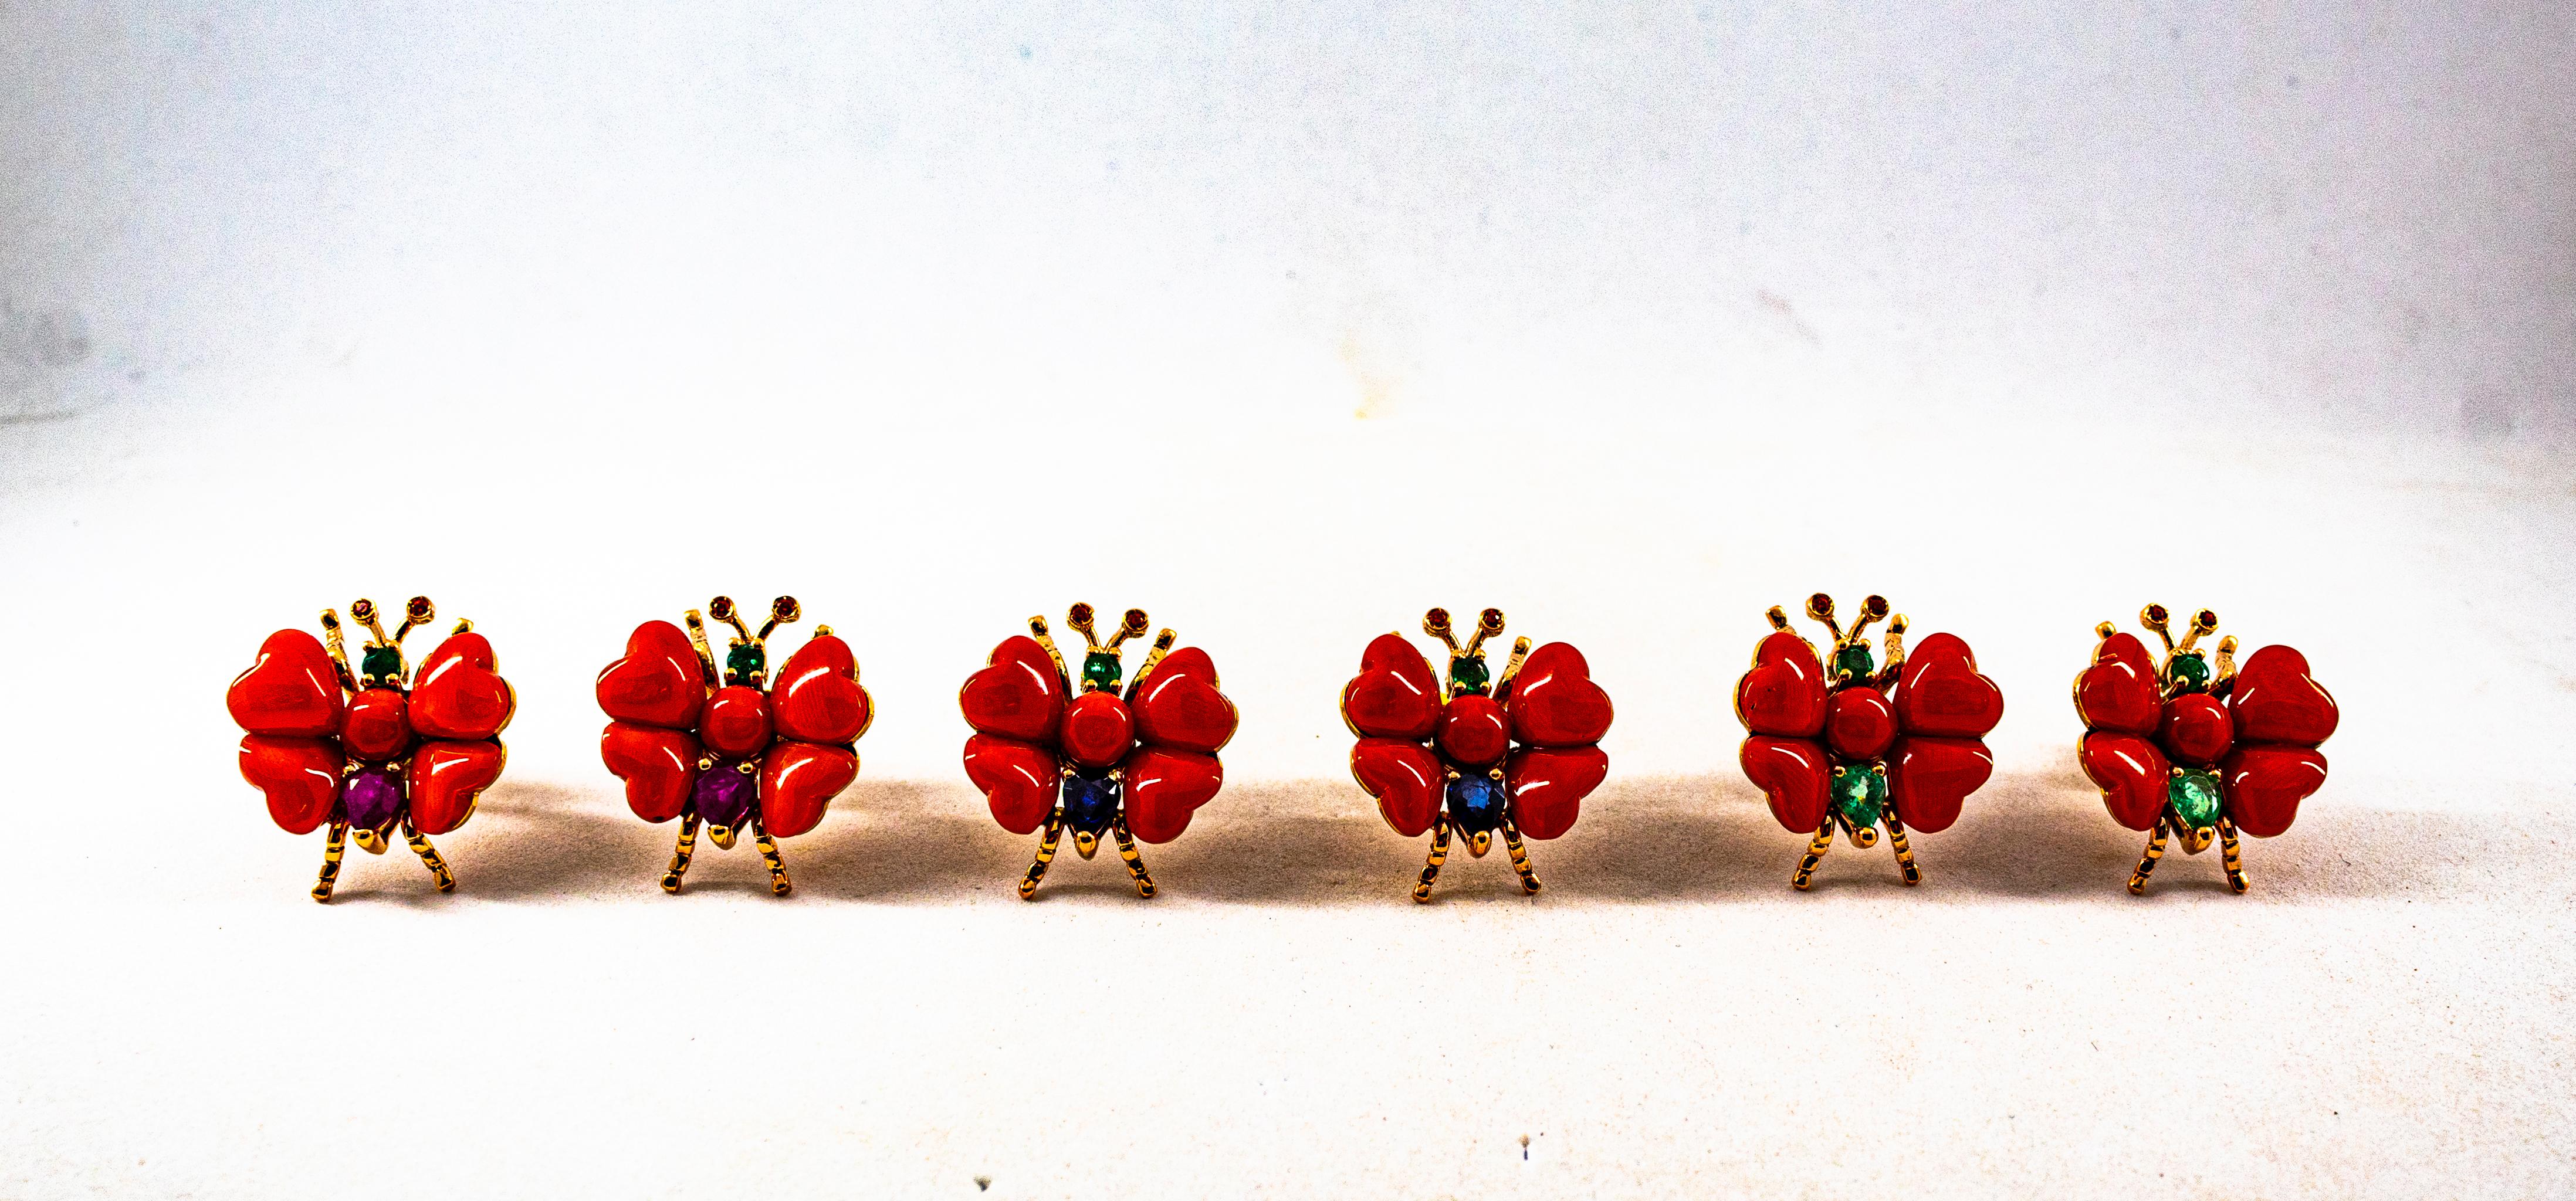 Blue Sapphire Ruby Emerald Mediterranean Red Coral Yellow Gold Stud Earrings For Sale 5